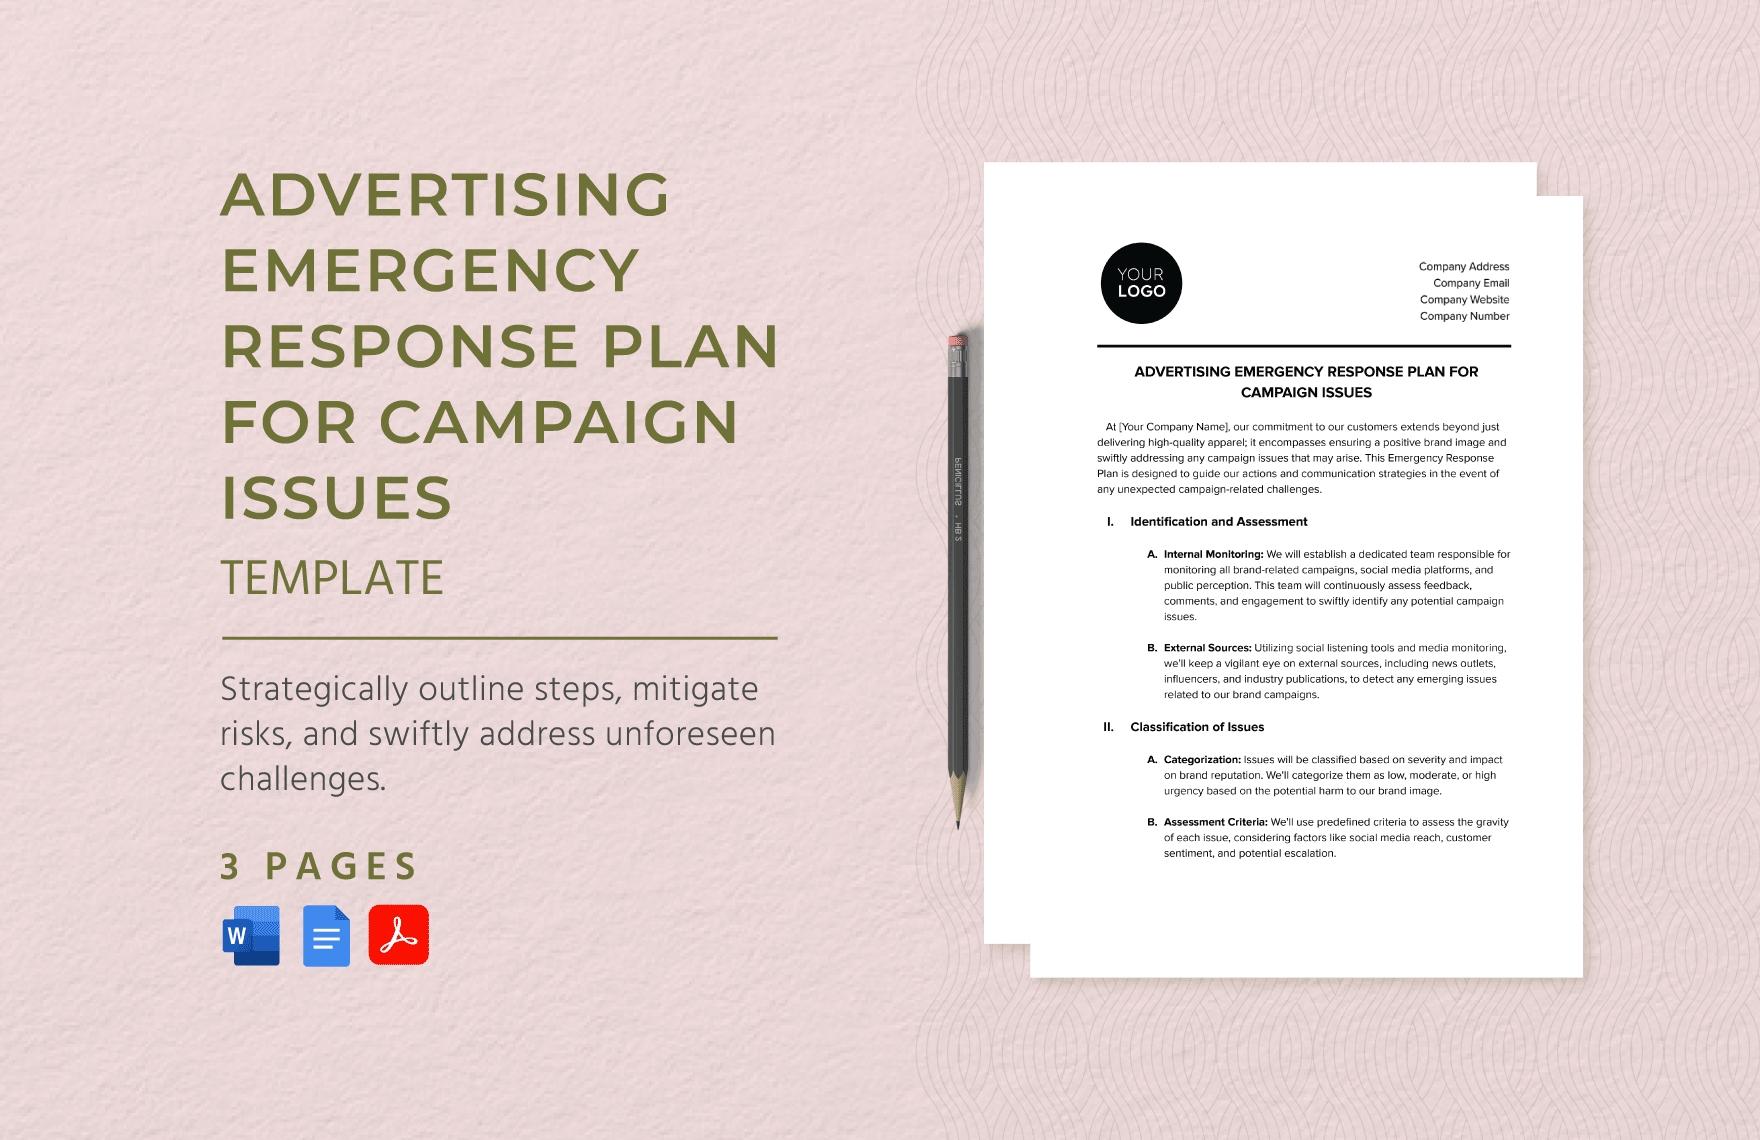 Advertising Emergency Response Plan for Campaign Issues Template